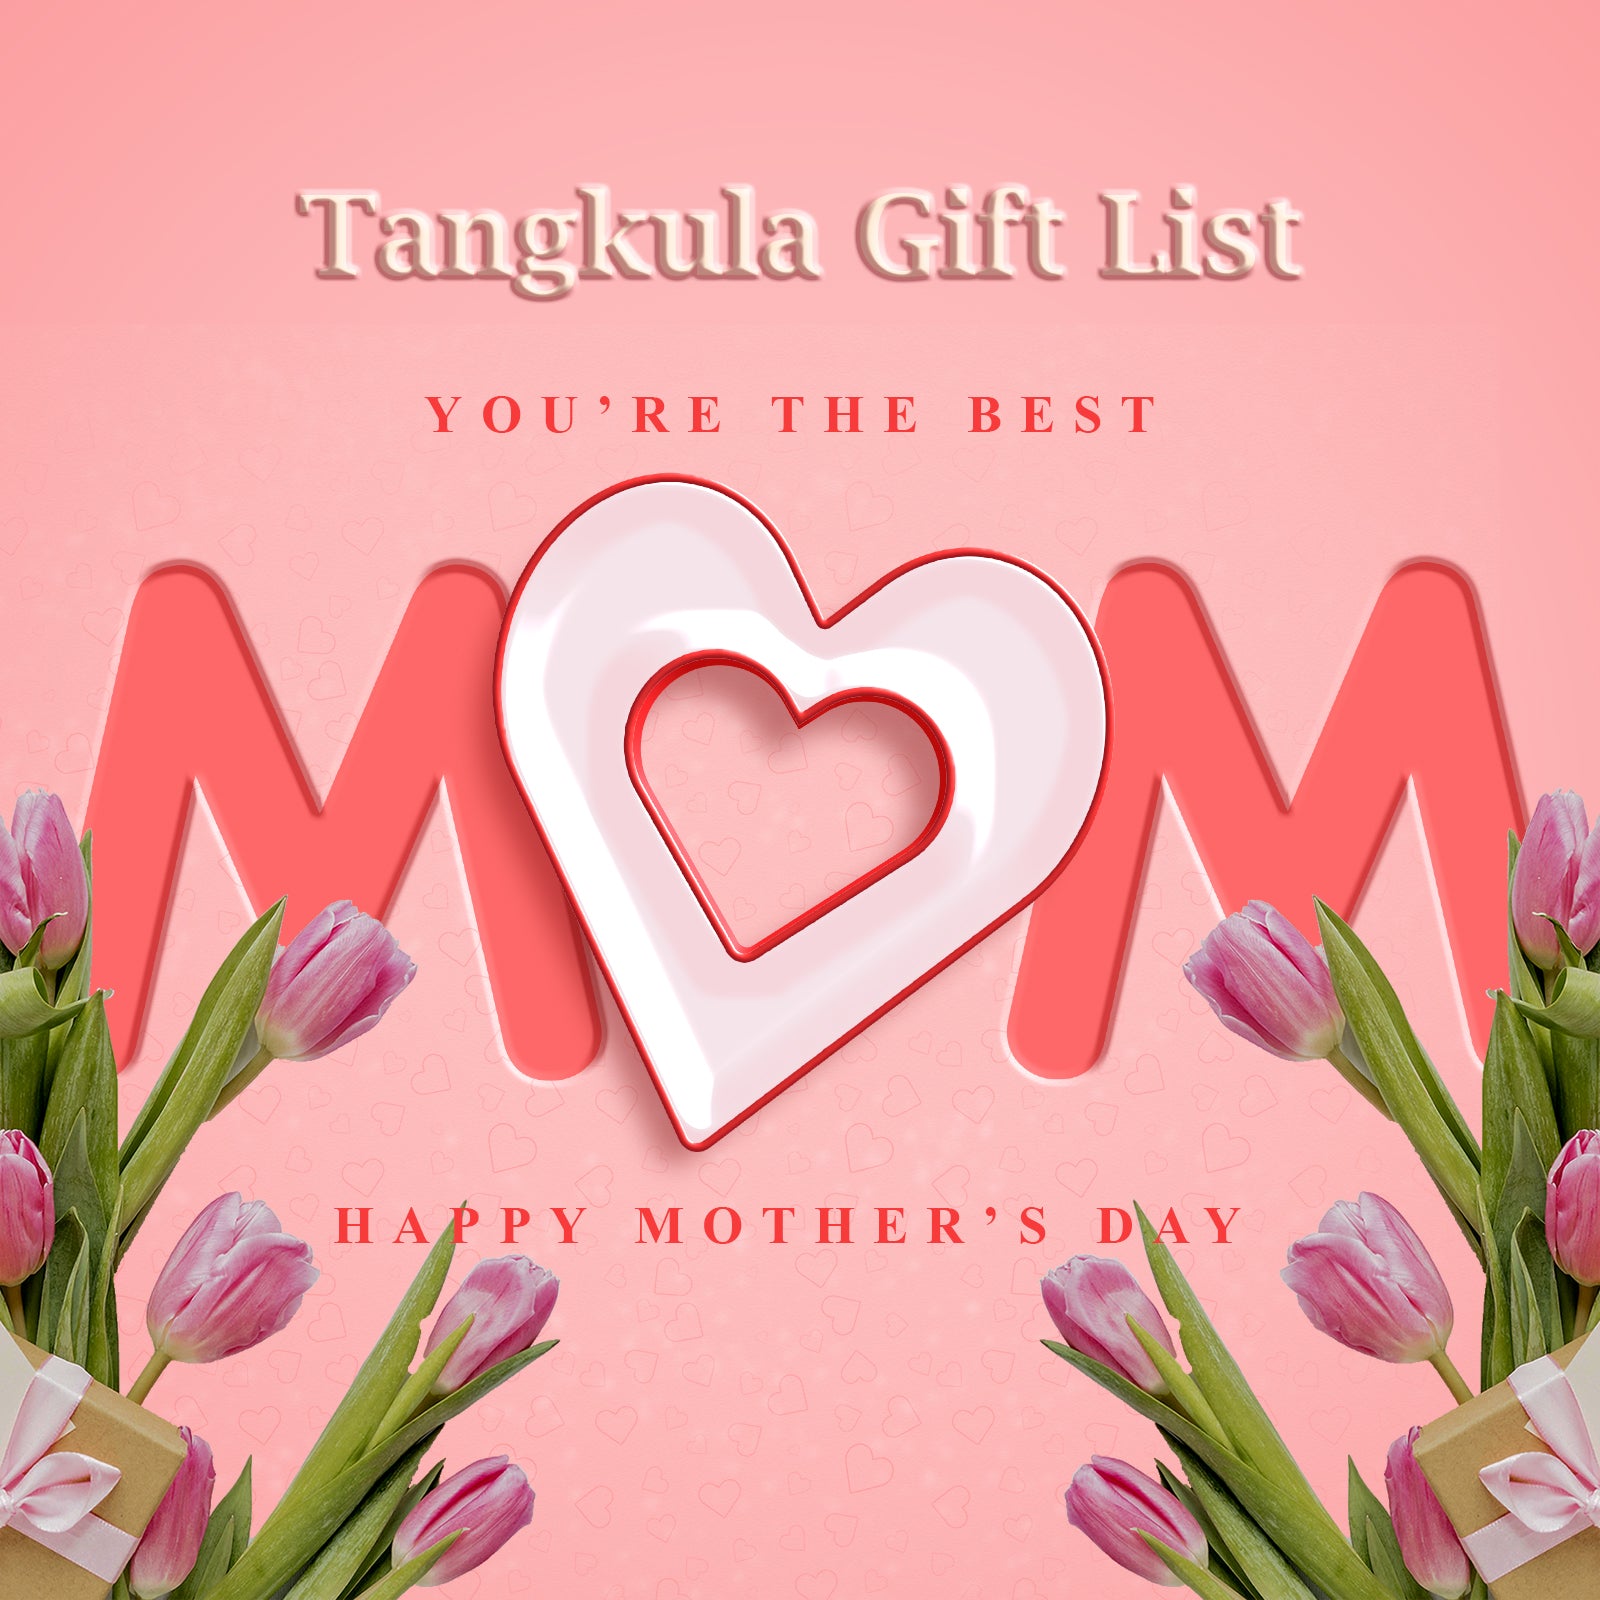 Mother's Day Gift List 2023 - Tangkula